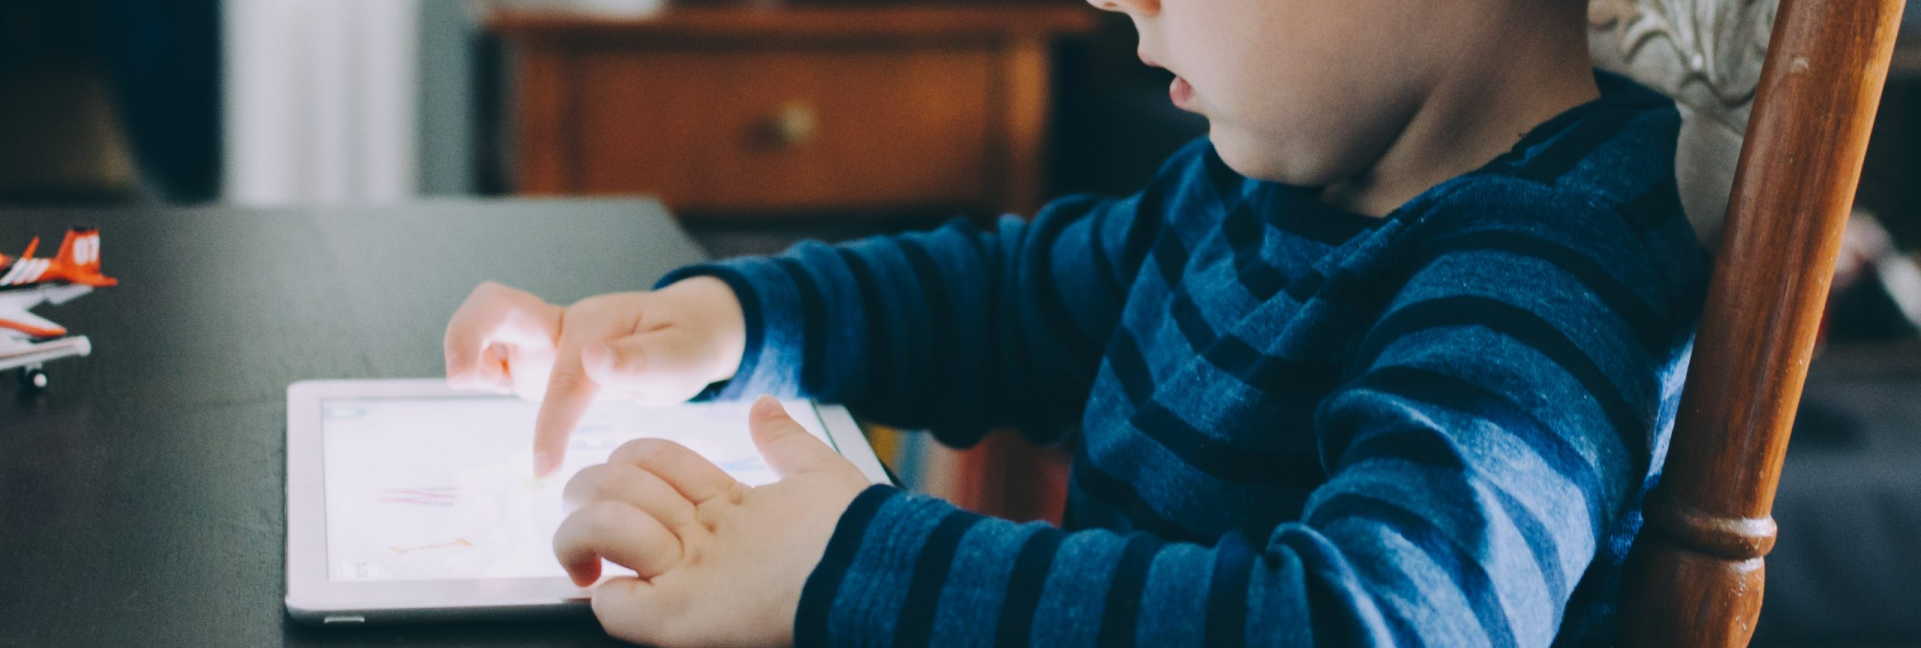 Top 10 Educational Apps For Kids - Comwave